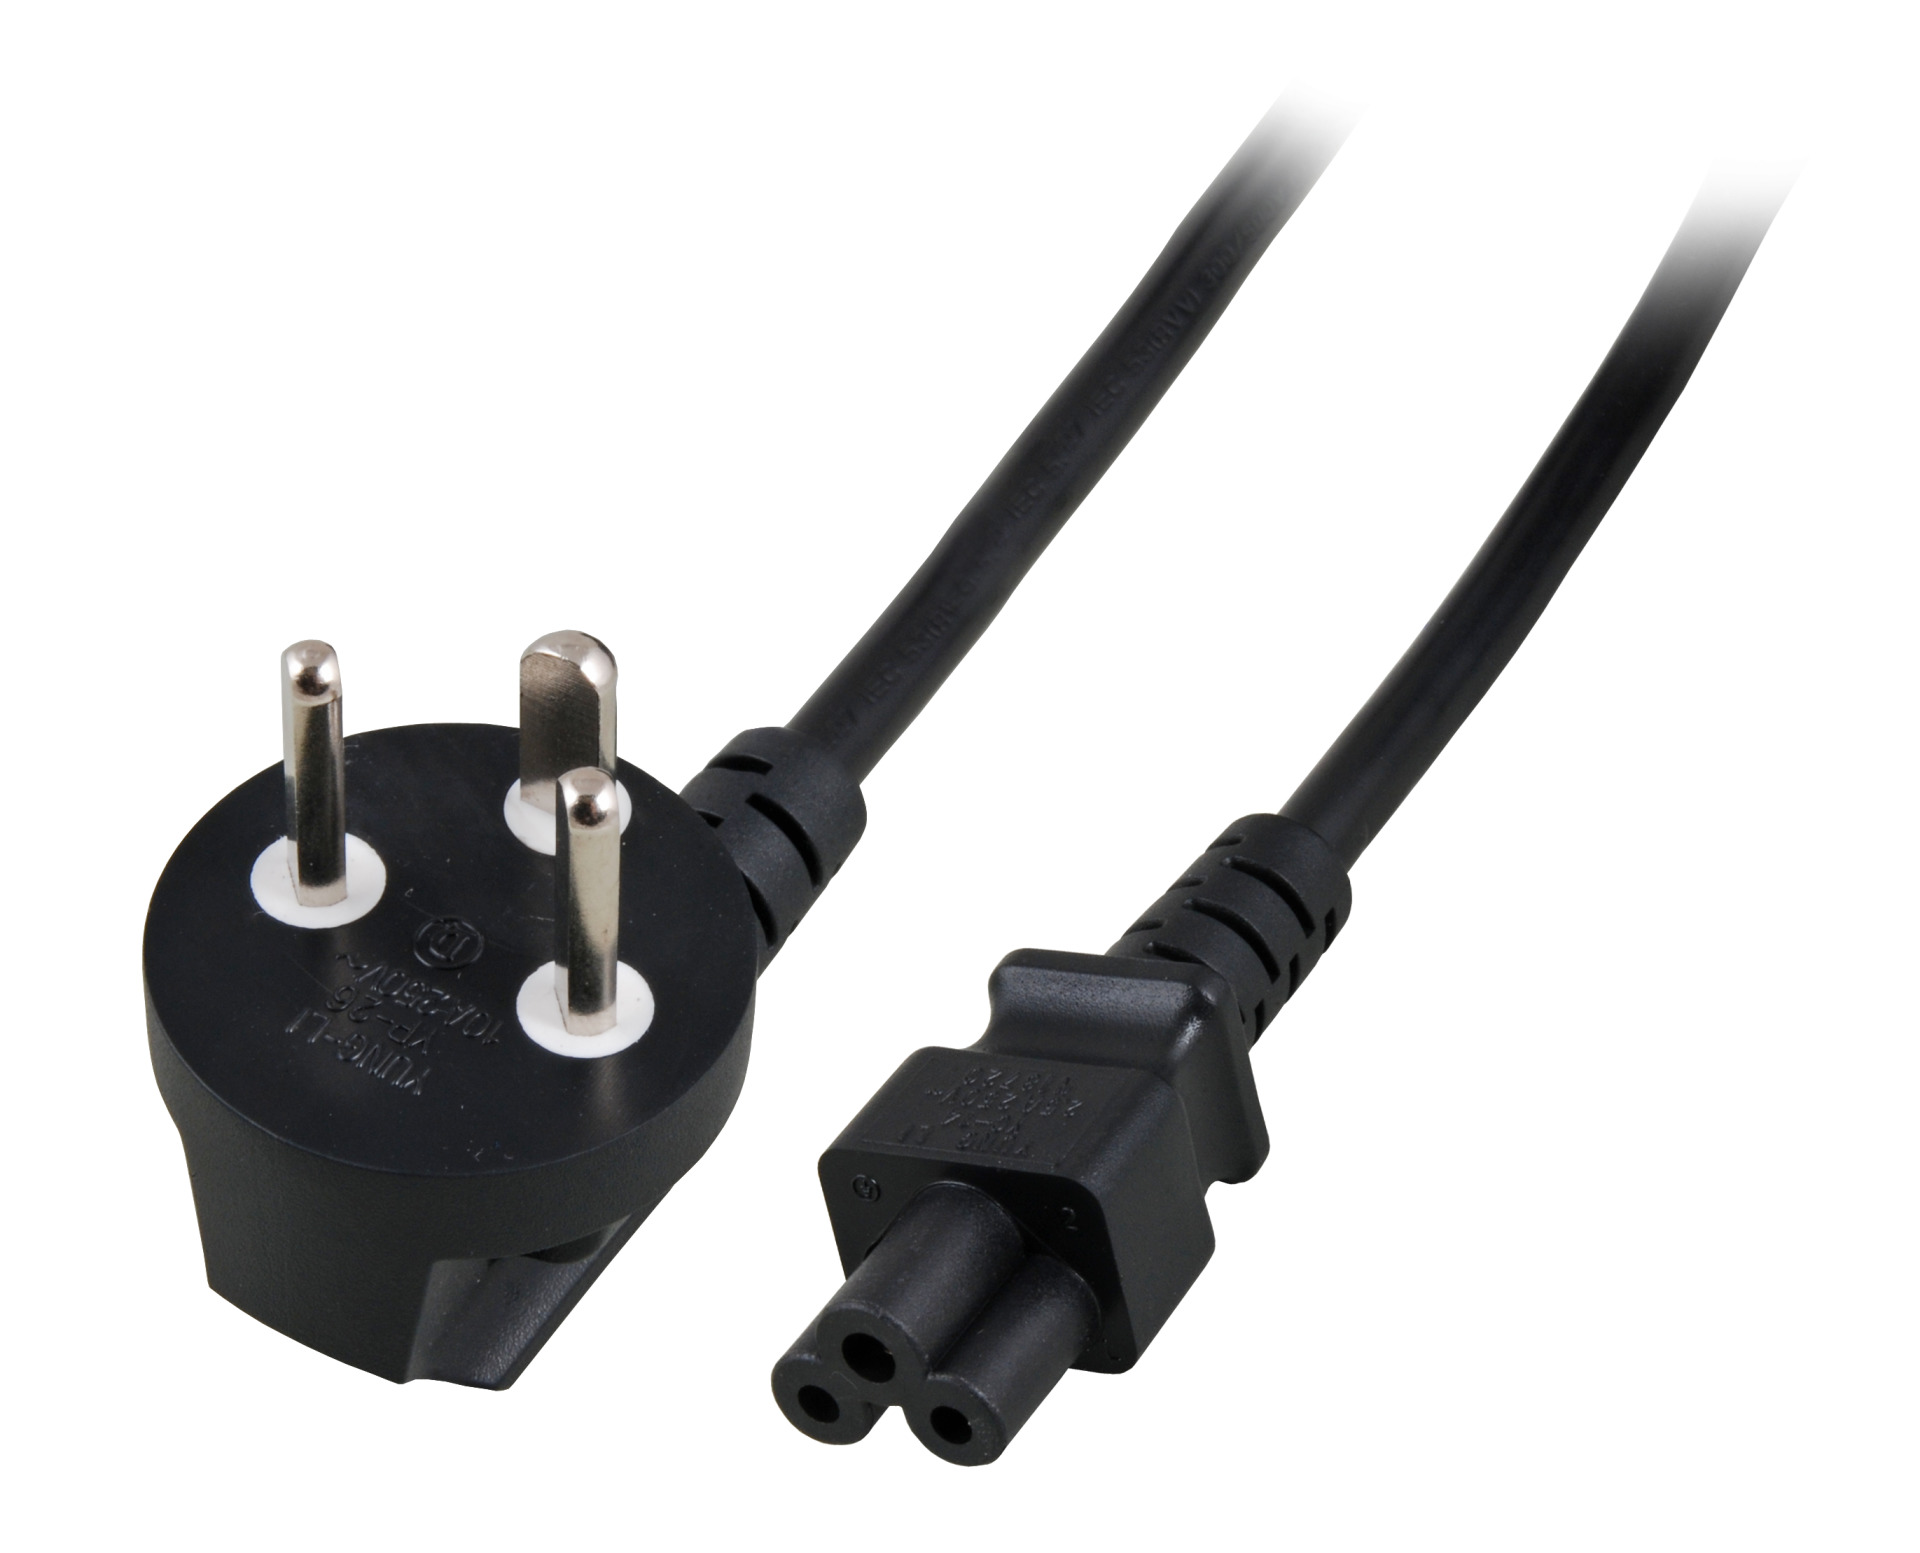 Power Cable Denmark DPin 90° - C5 180°, Black, 1.8 m, 3 x 0.75 mm²